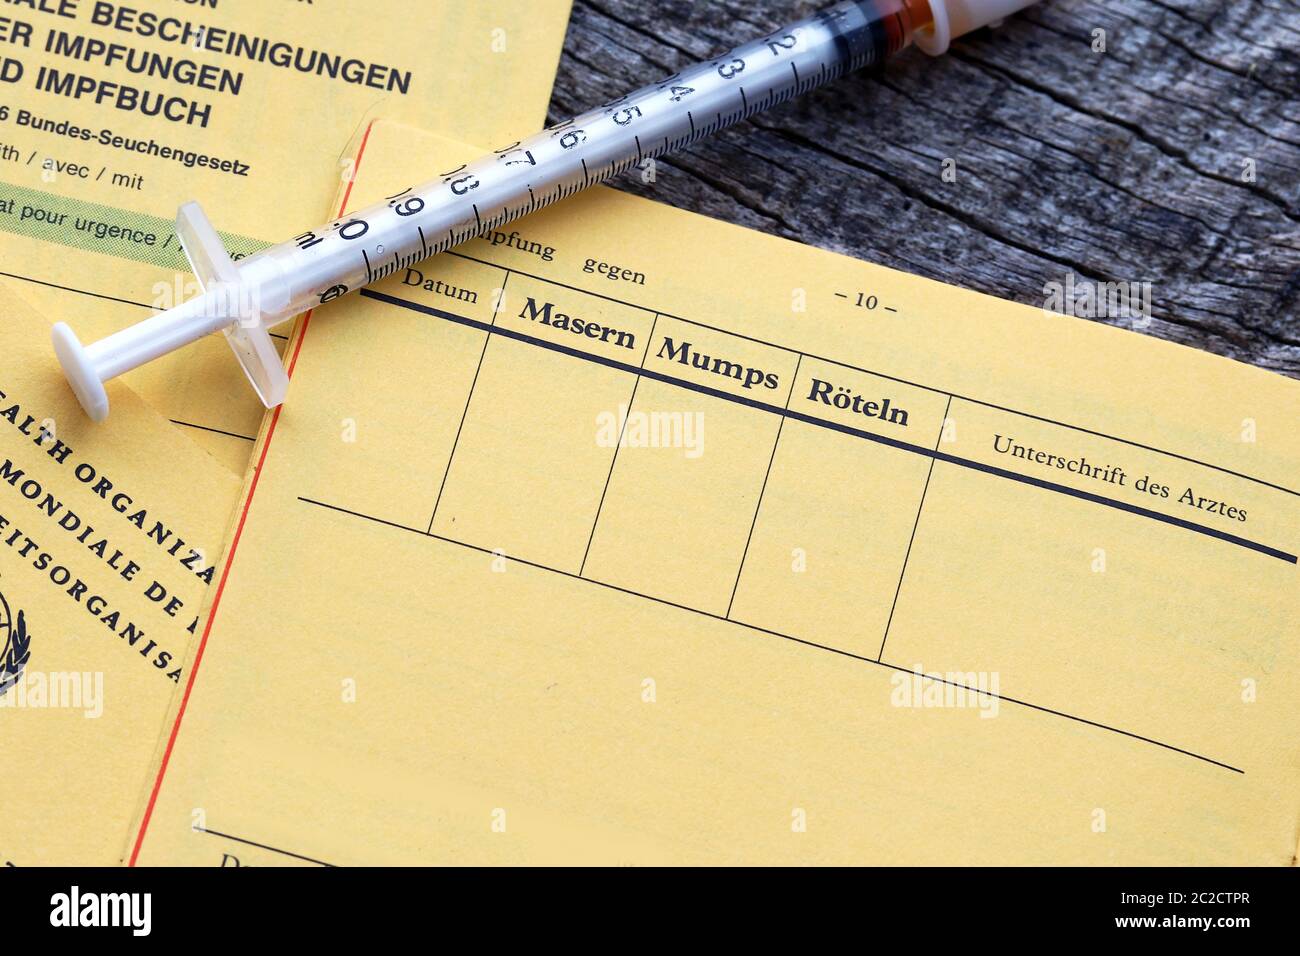 Vaccination against measles and other childhood diseases. Vaccination pass for vaccinations Stock Photo